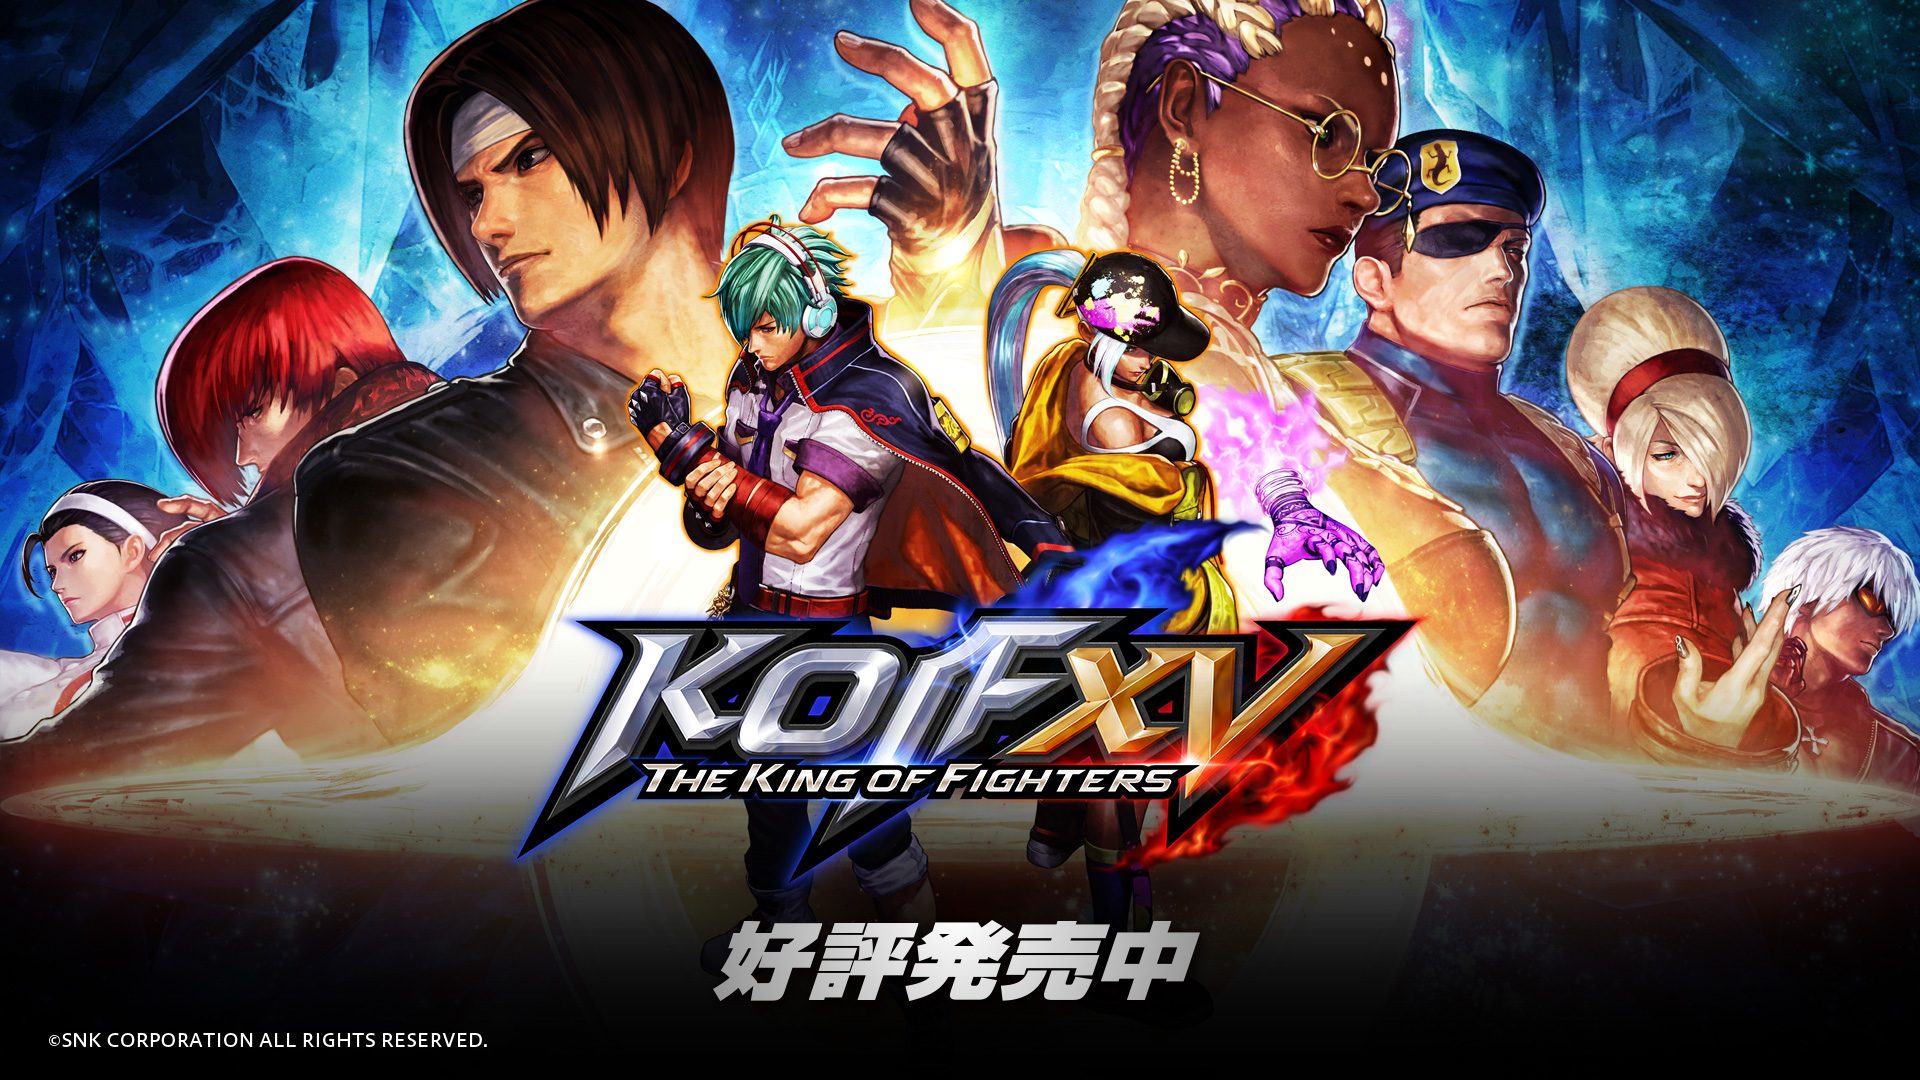 PS5™/PS4®『THE KING OF FIGHTERS XV』本日発売！ 39キャラが参戦する